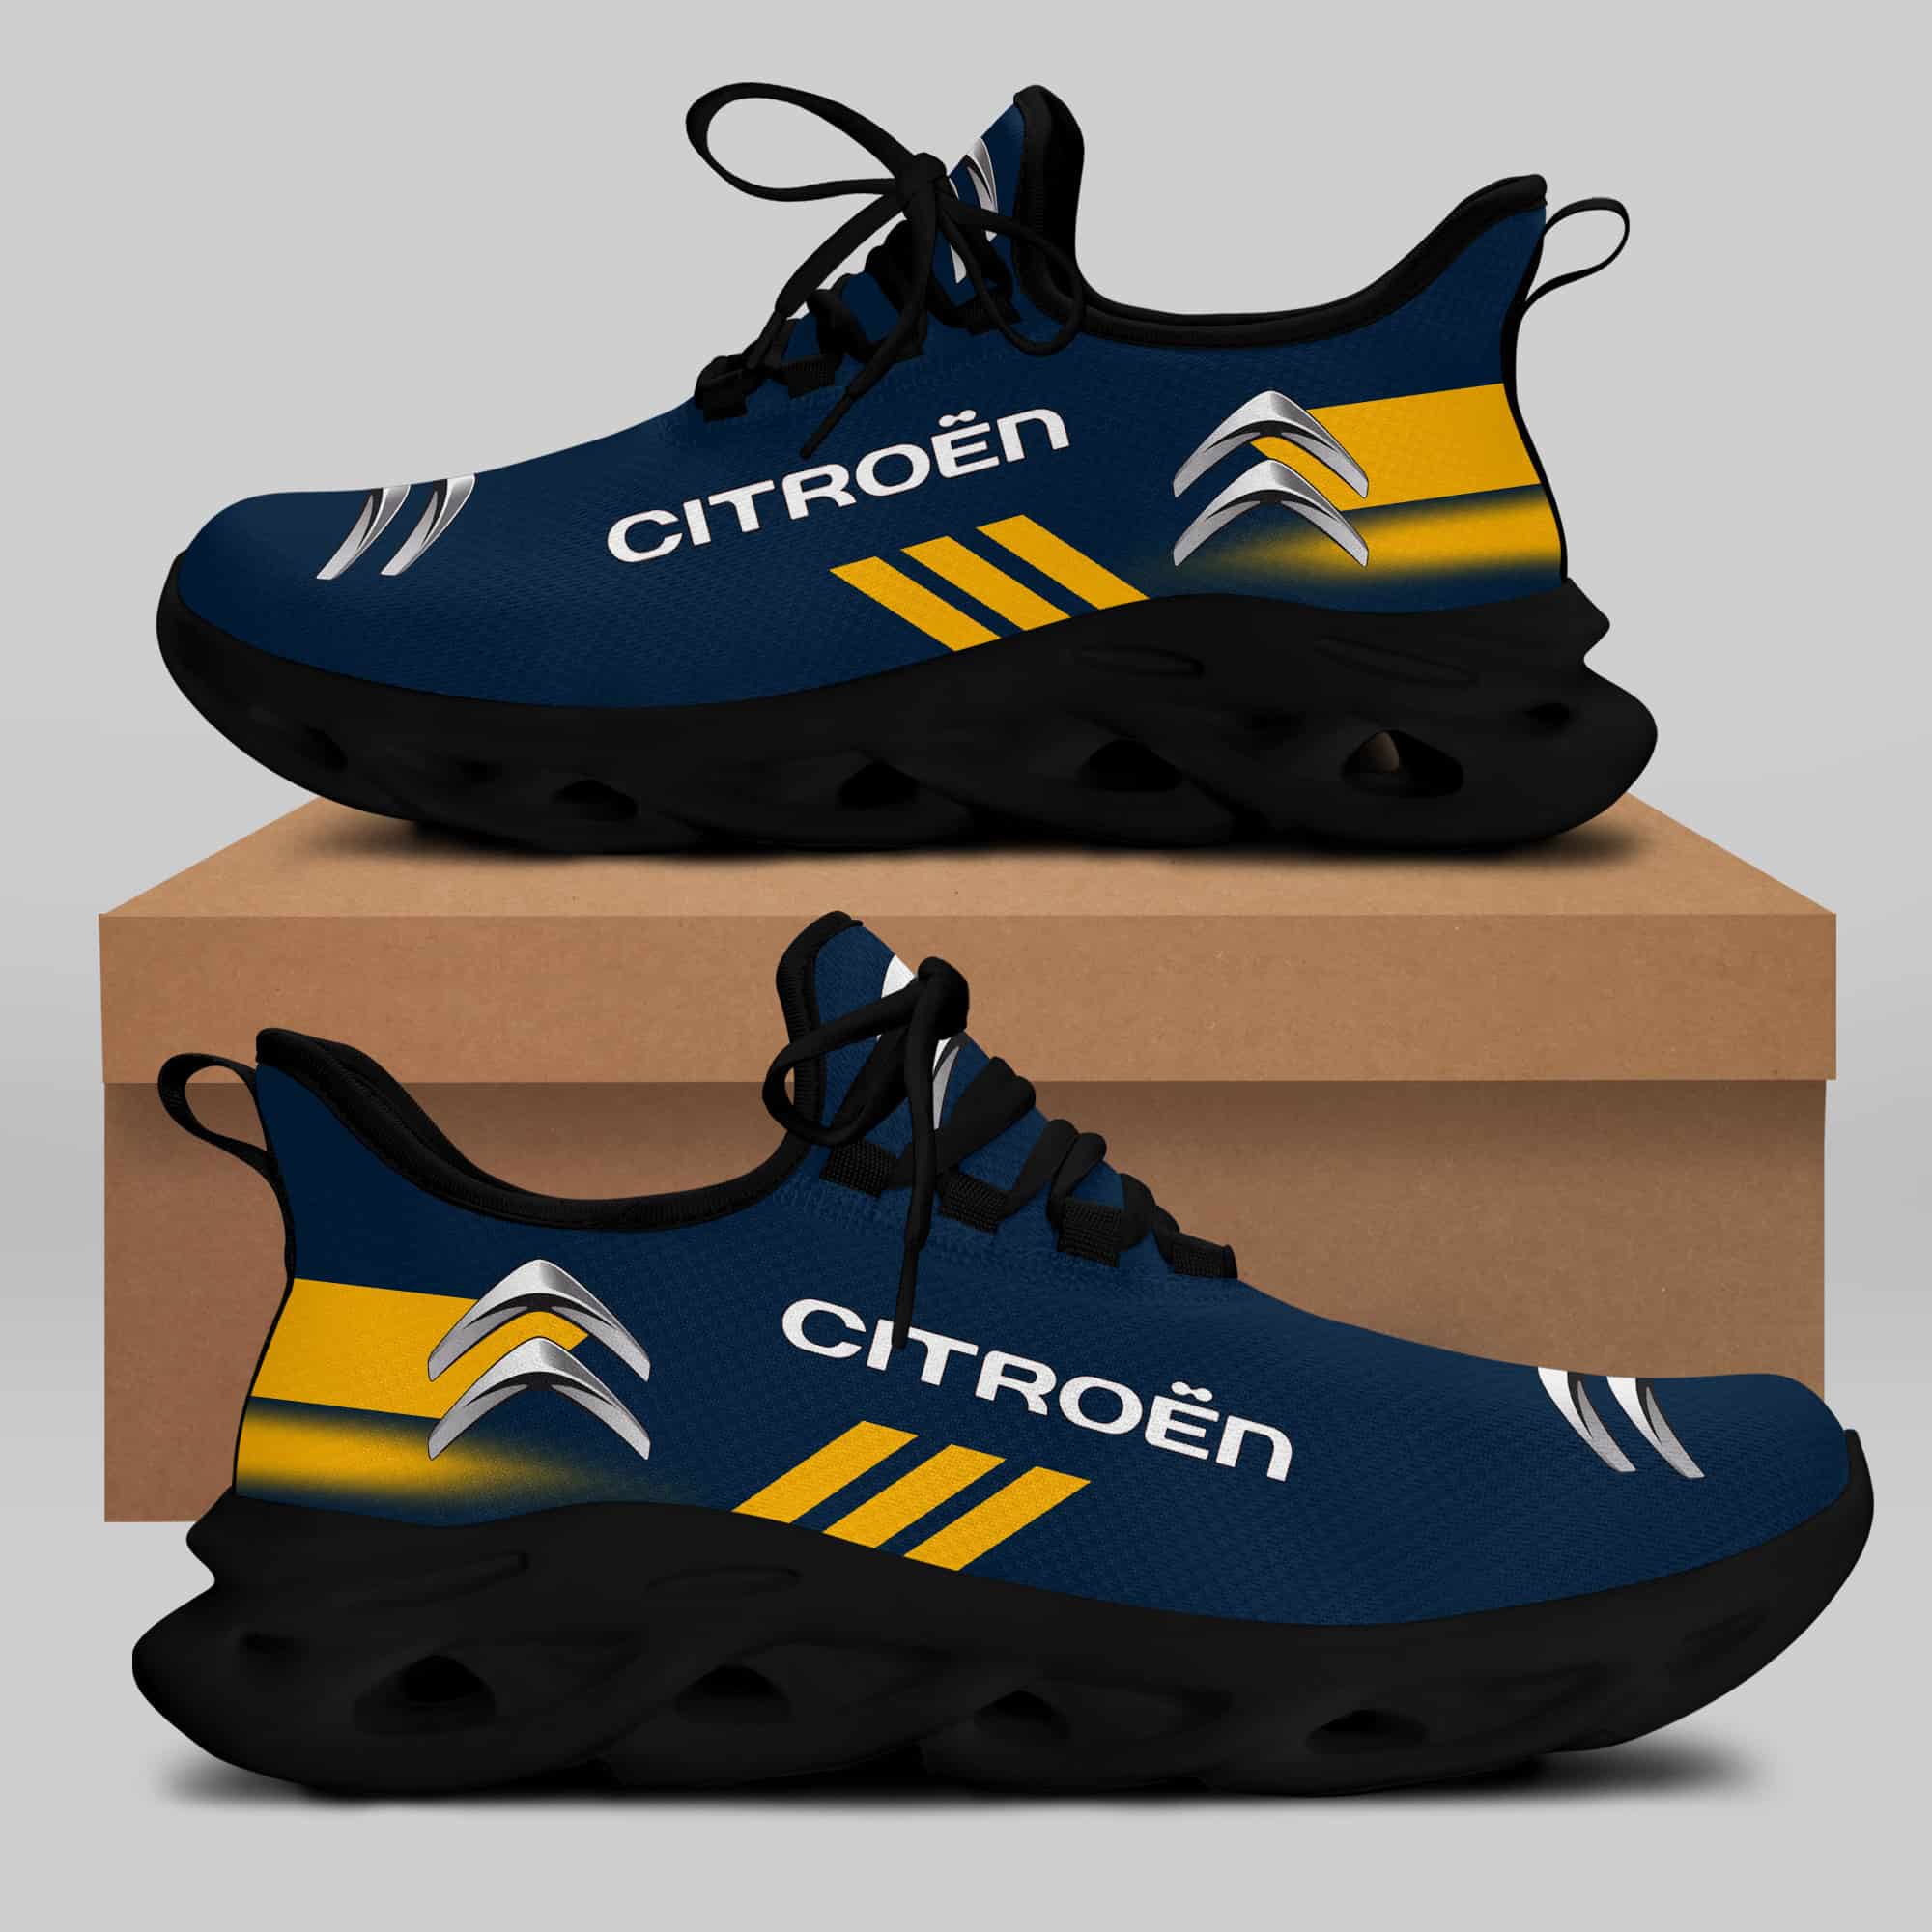 Citroën Running Shoes Max Soul Shoes Sneakers Ver 15 1